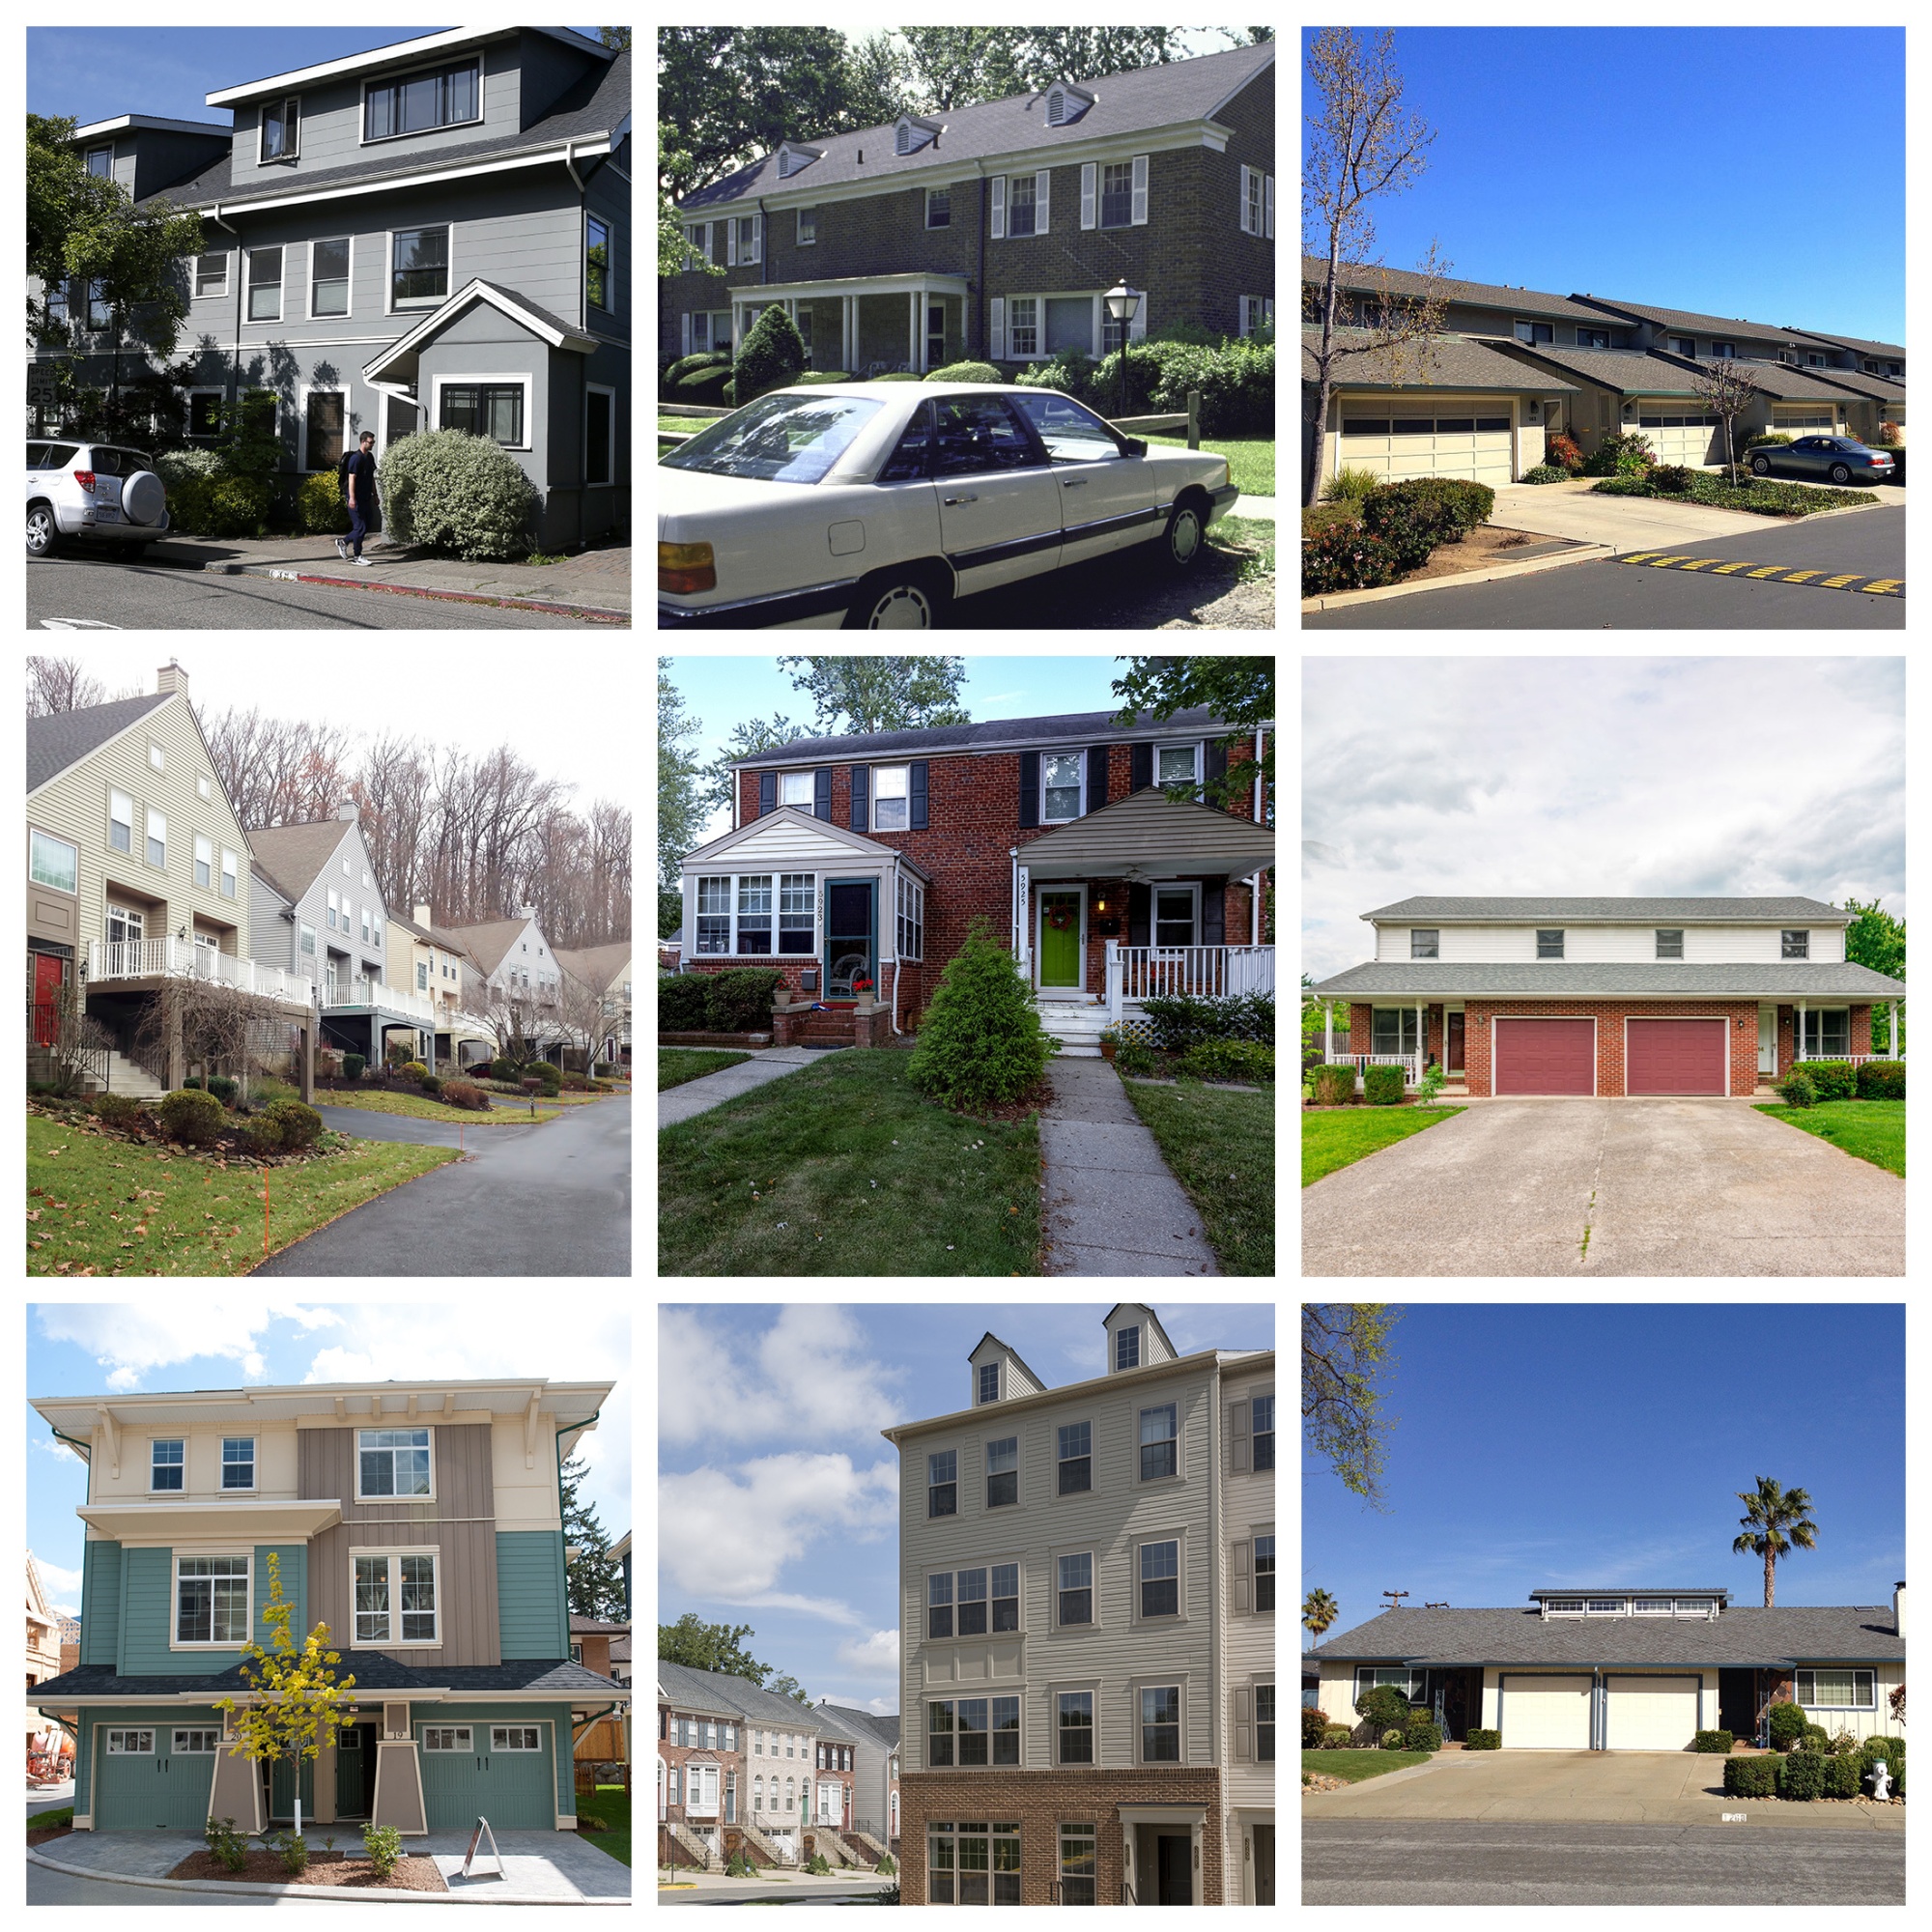 U.S. Cities Building the Most Multi-Family Housing